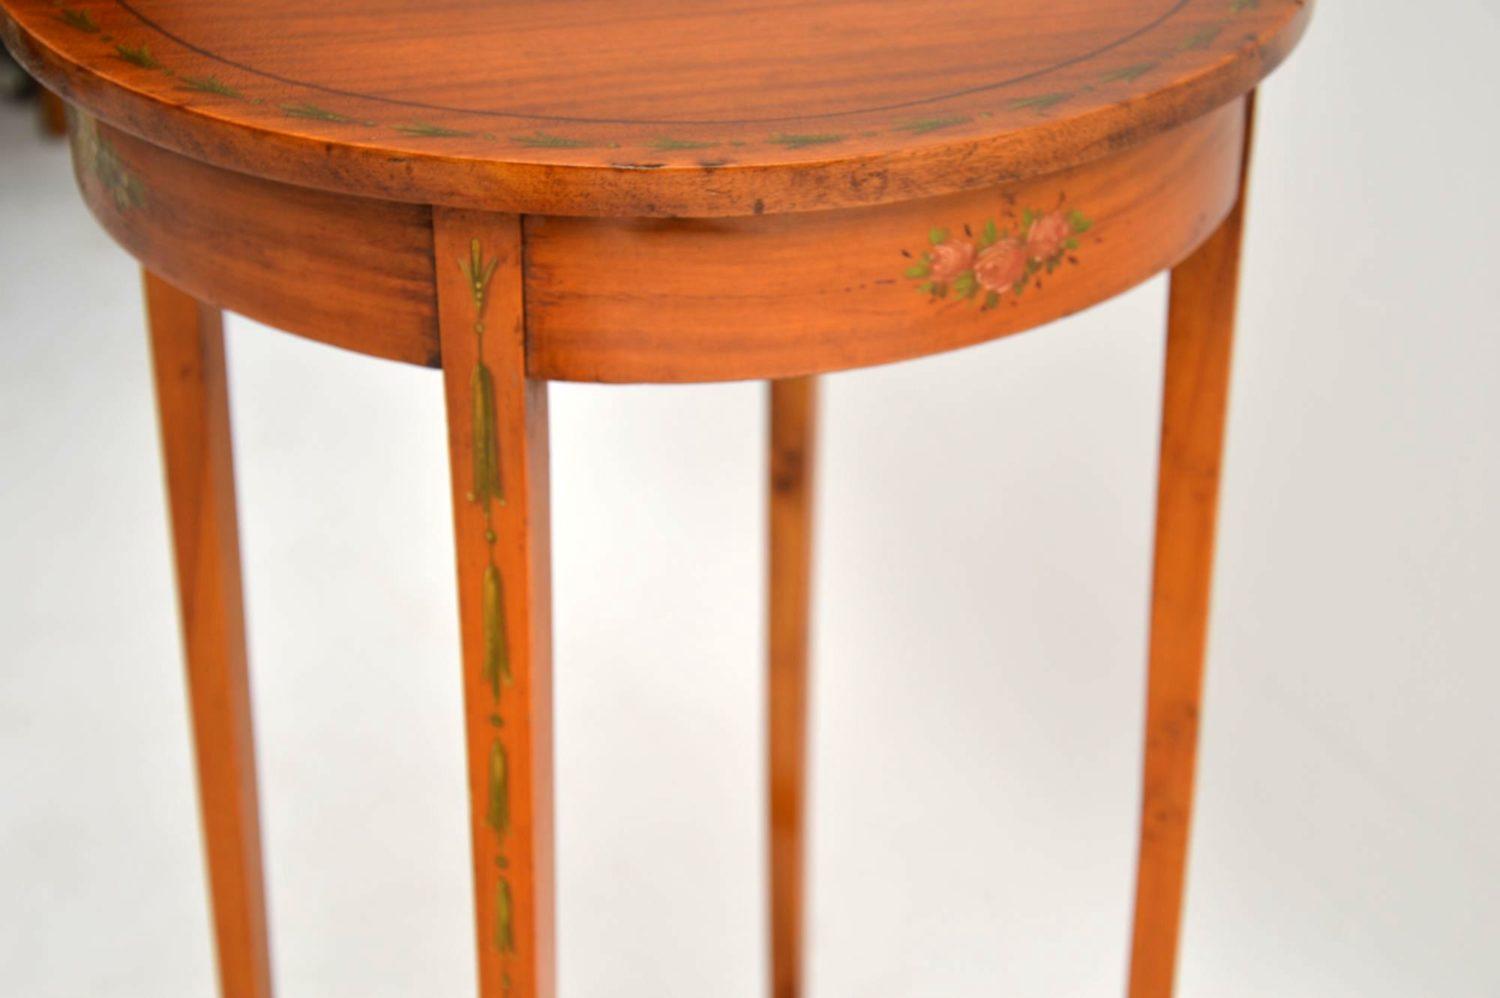 Antique Edwardian Painted Satin Wood Side Table 2